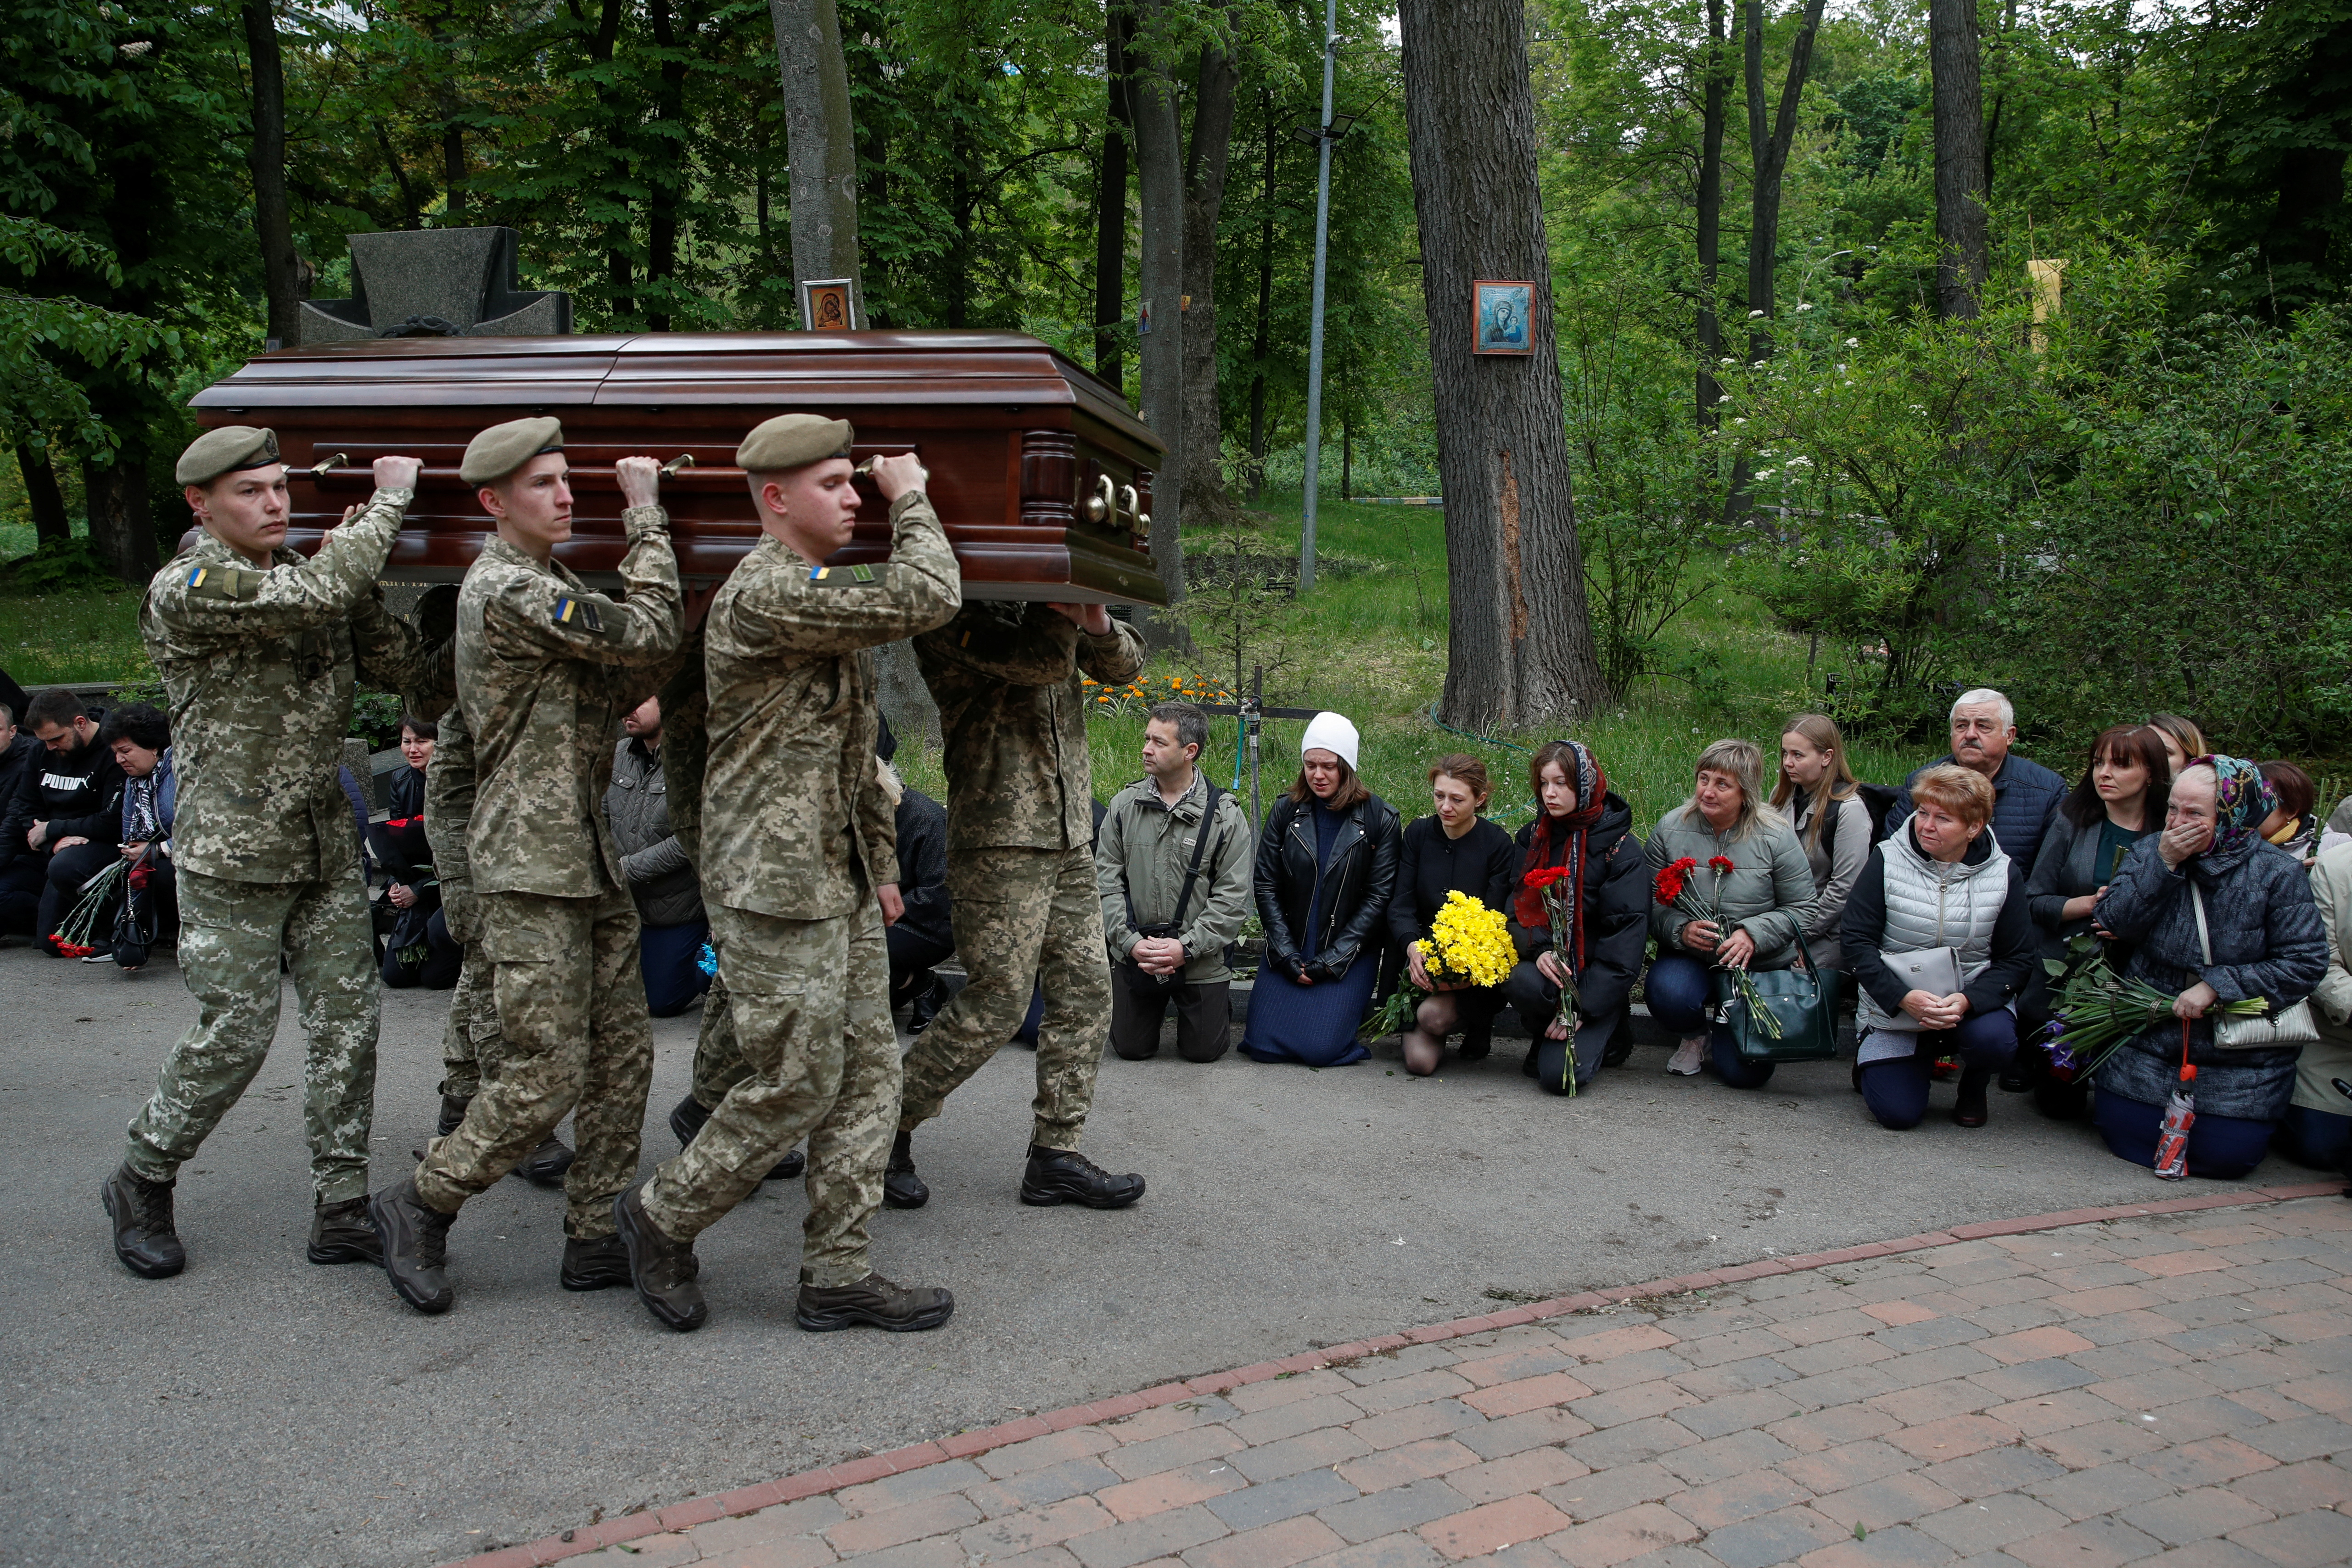 Funeral ceremony of Ukrainian serviceman recently killed in a fight with Russian troops, in Kyiv